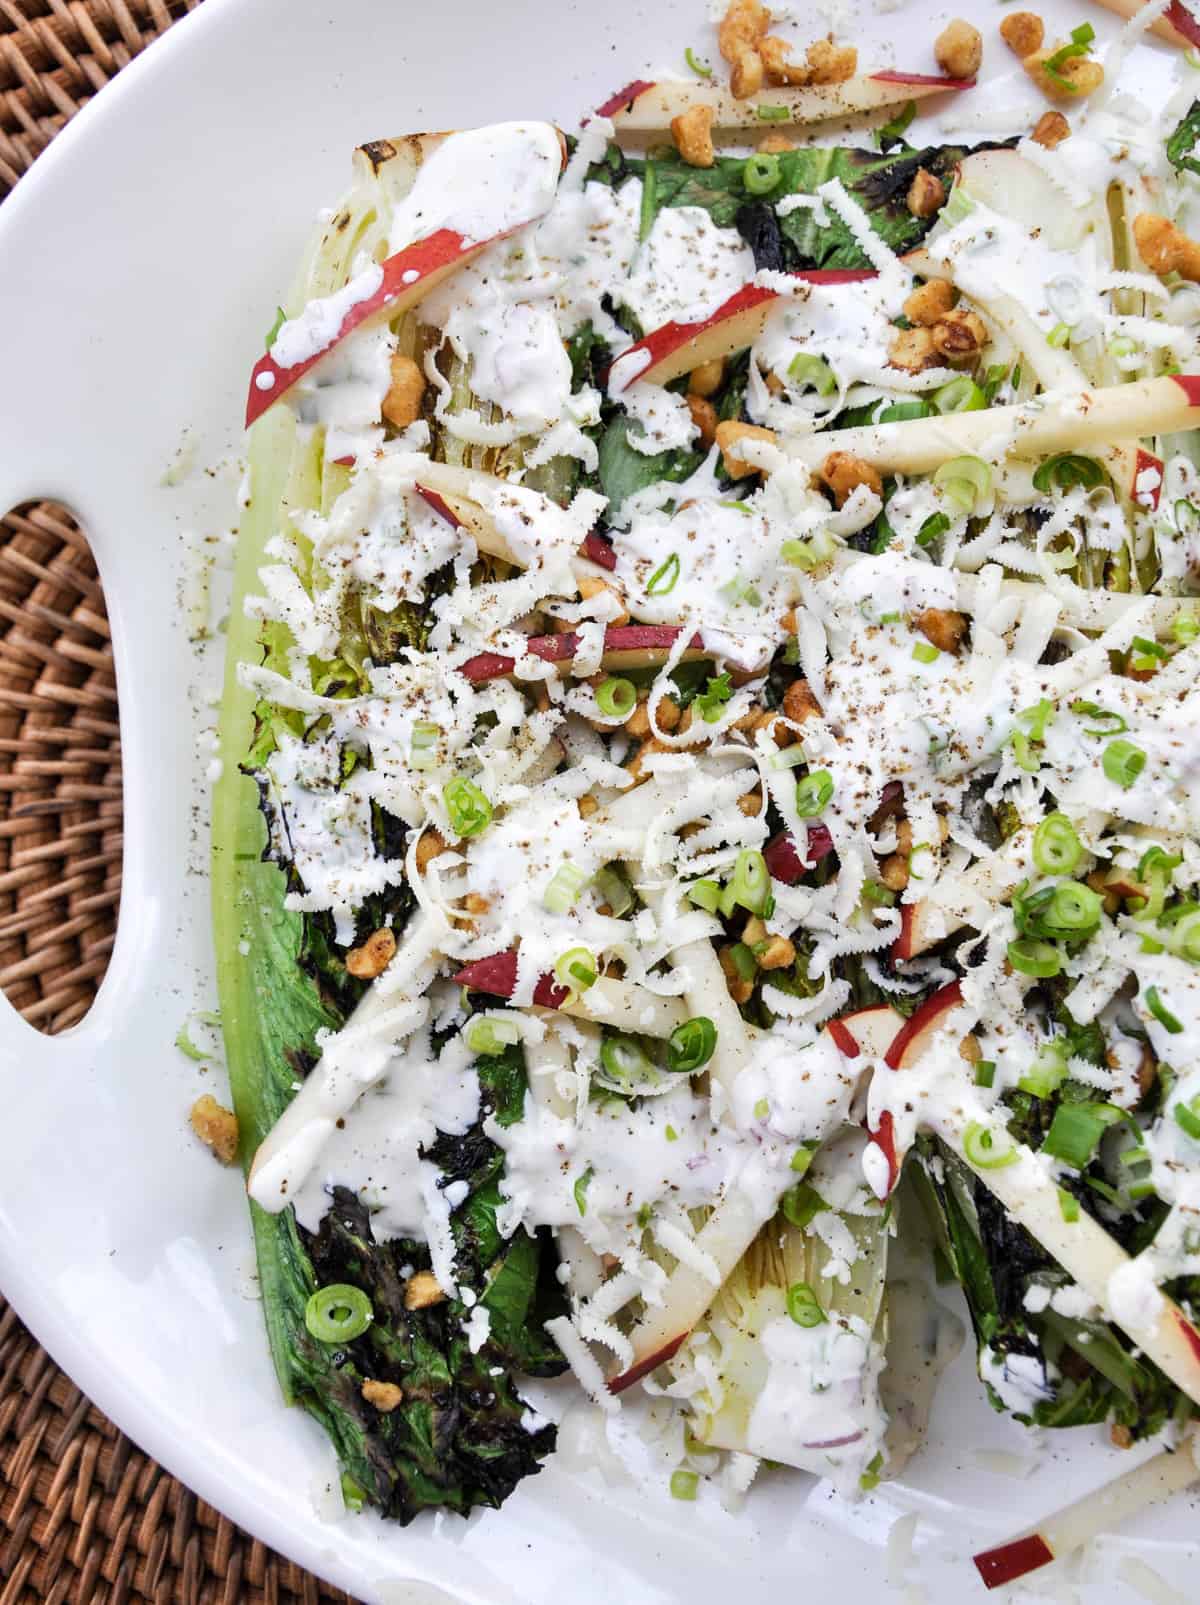 Grilled Romaine Salad with Crimson Pears and Candied Walnuts